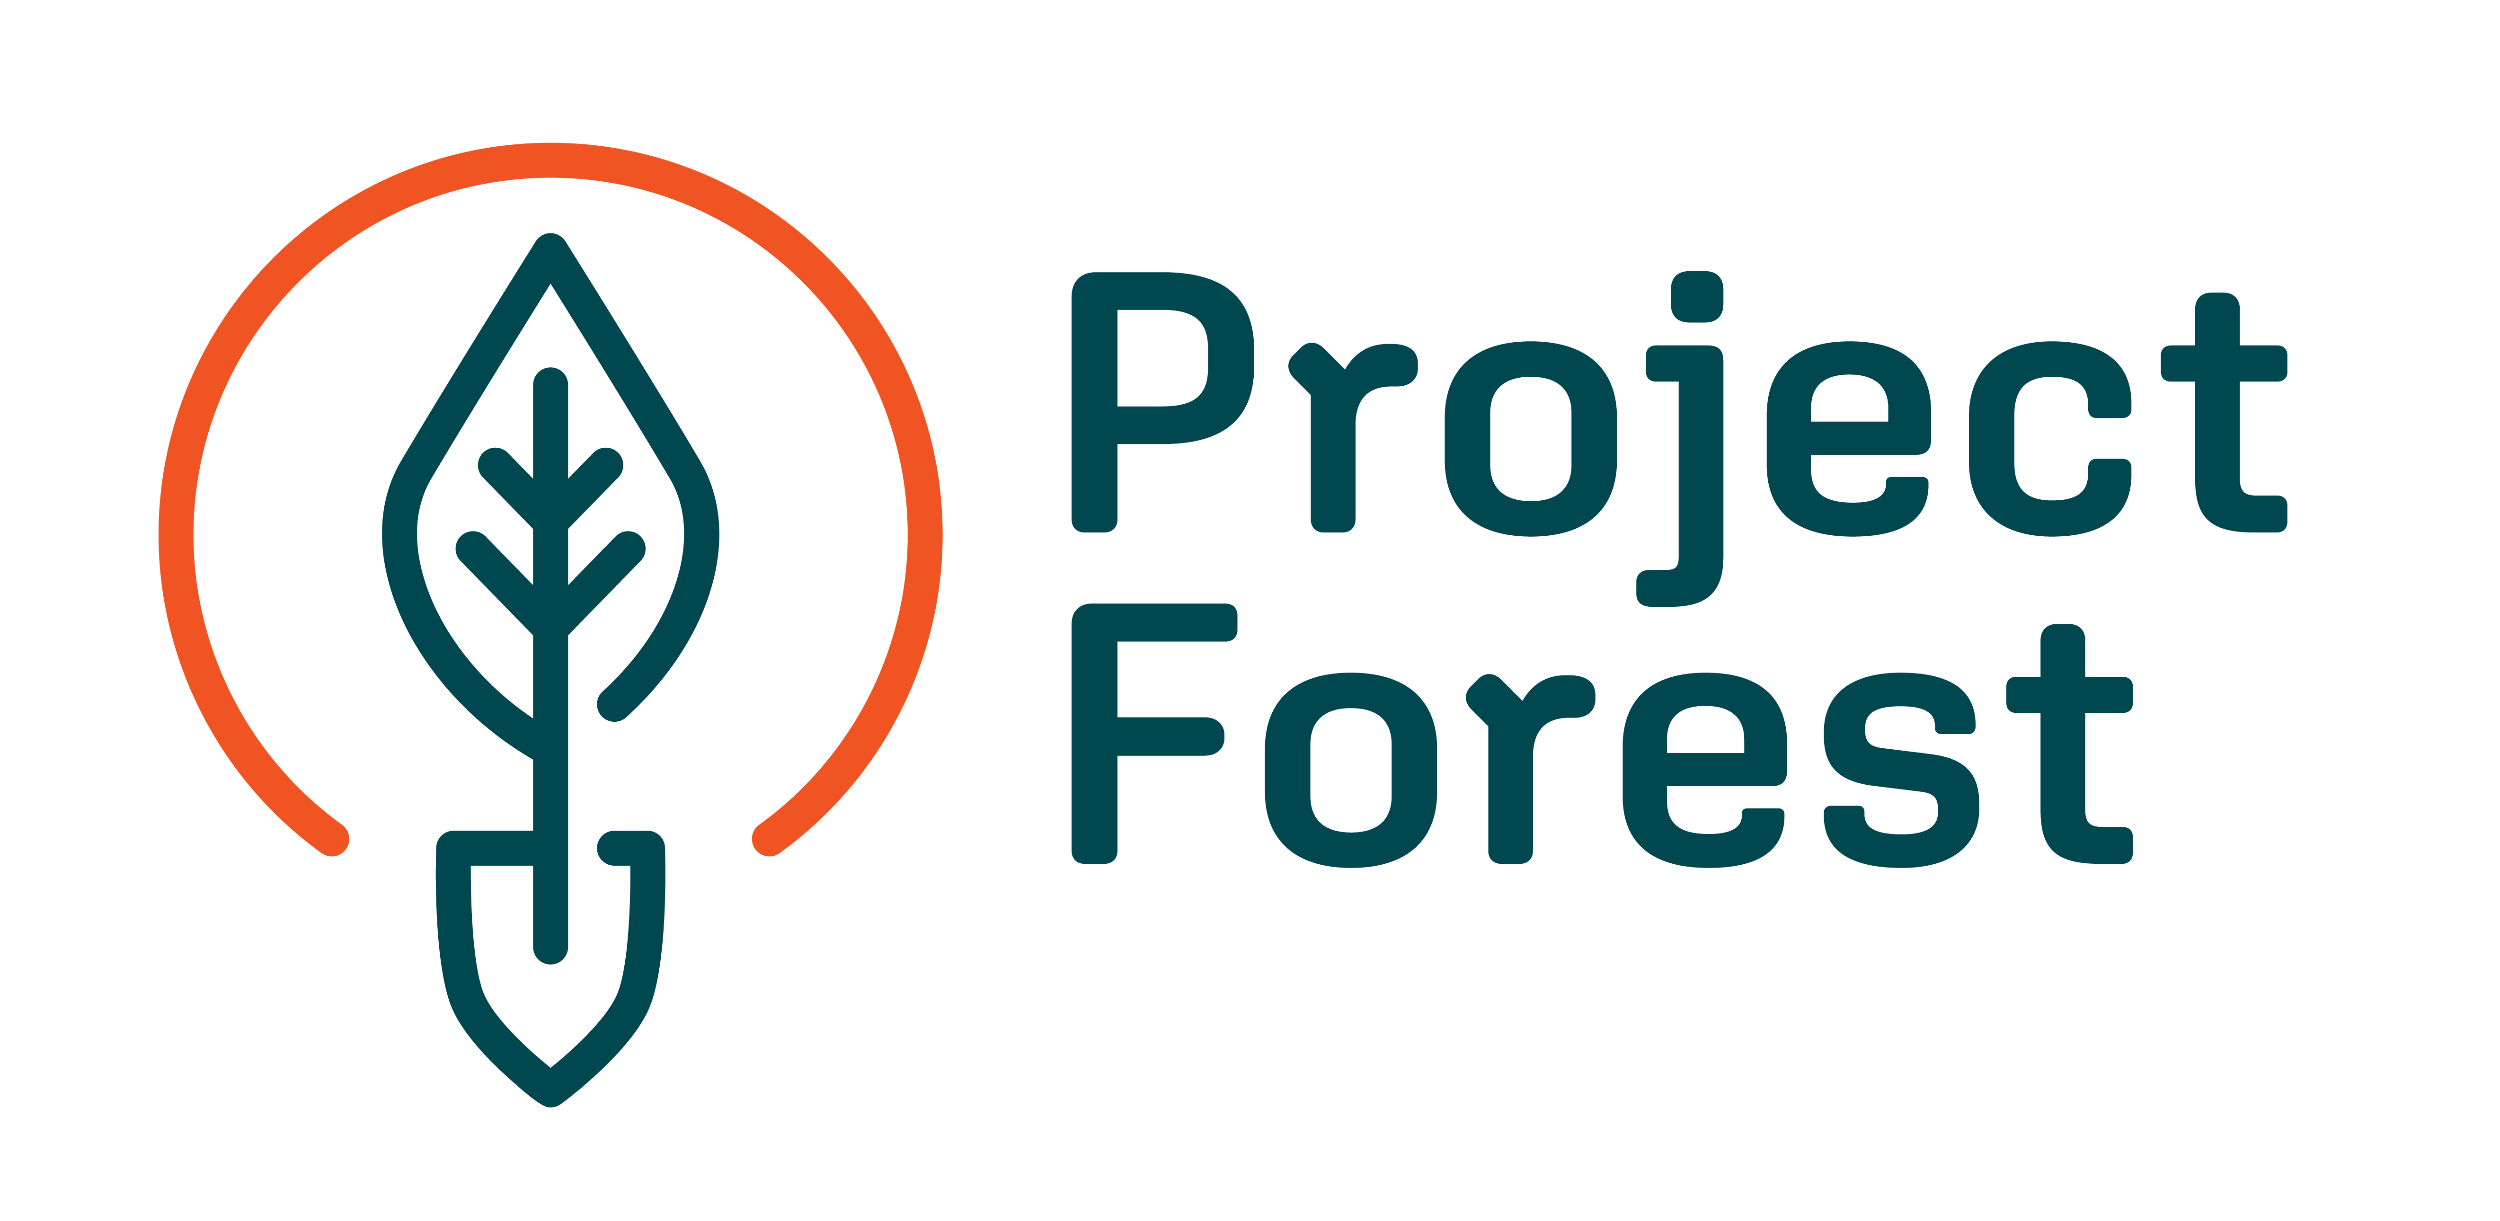 Project Forest logo_stacked.png